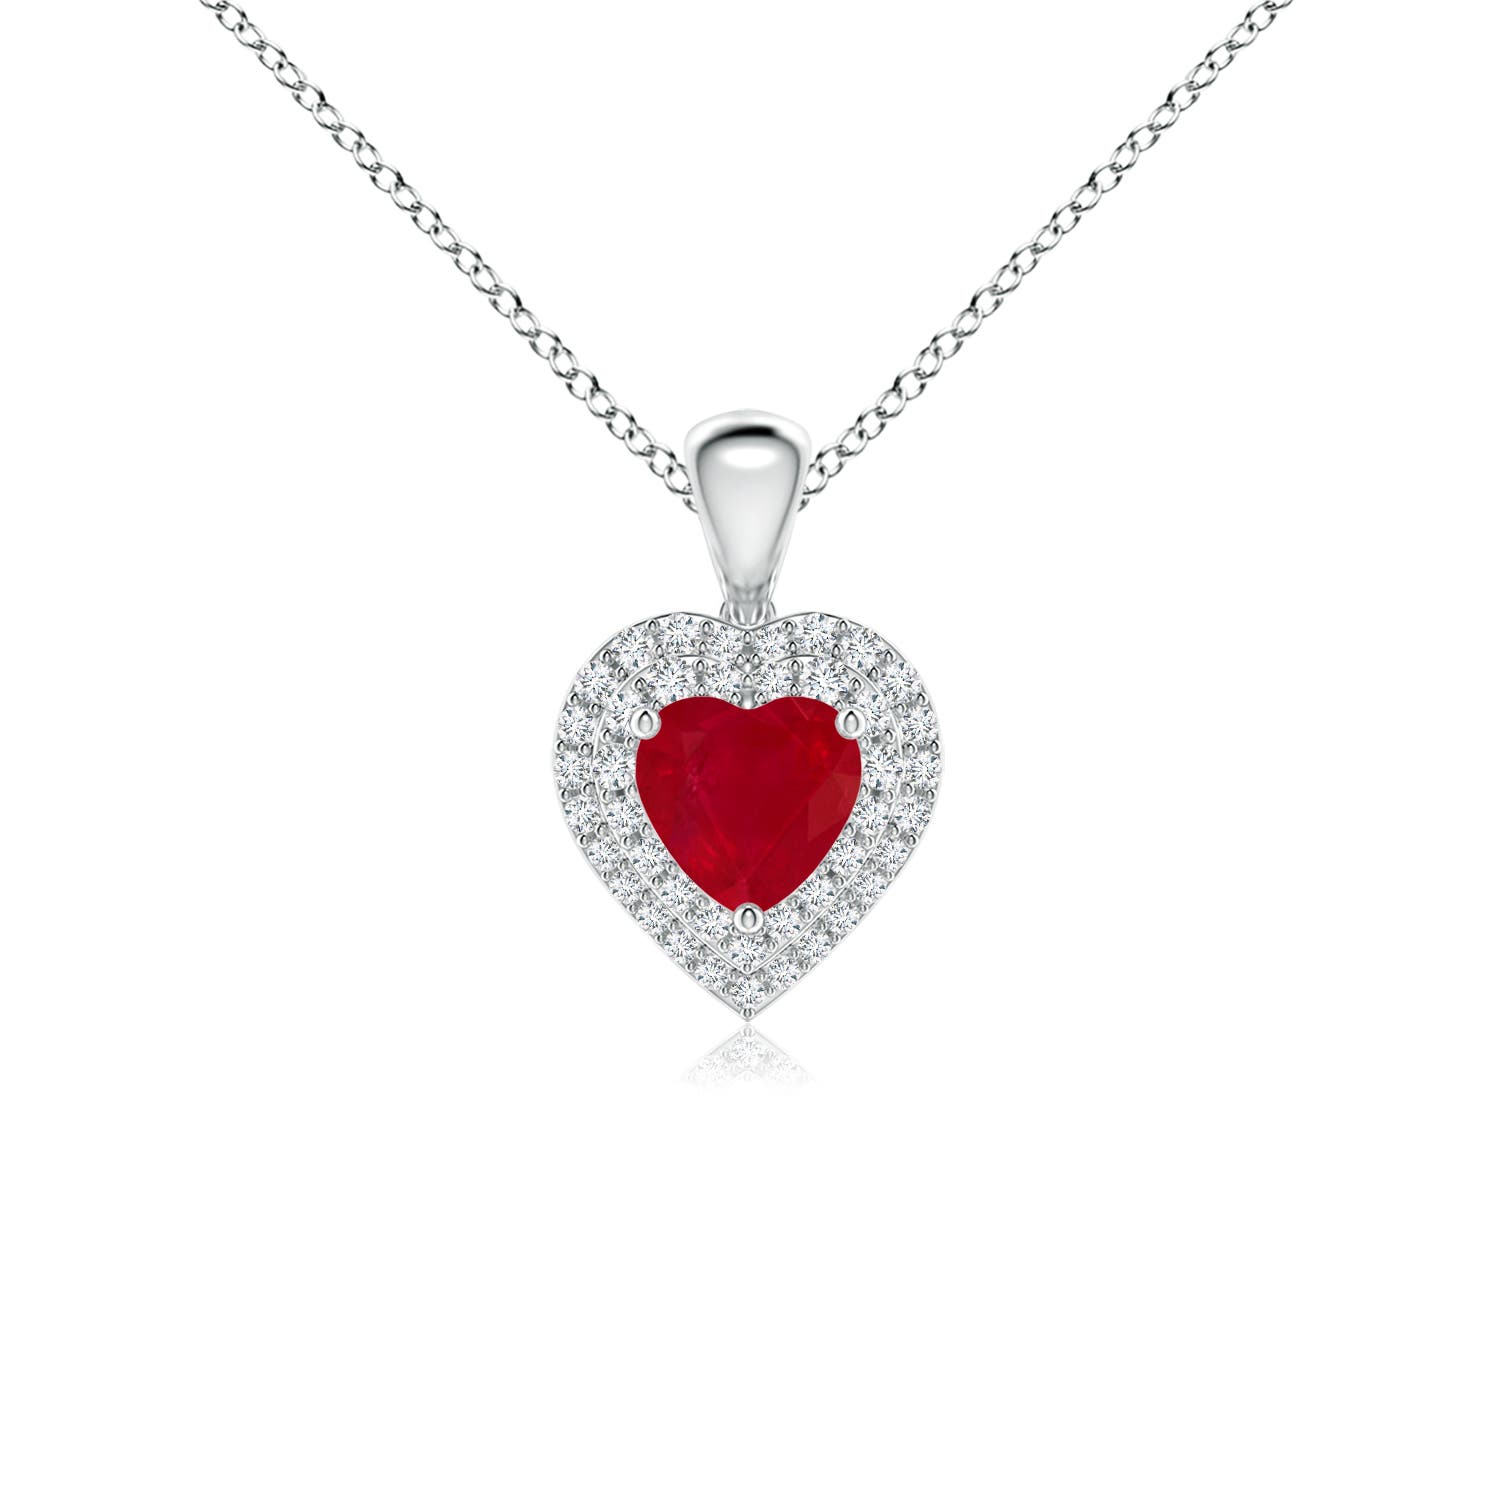 AA - Ruby / 0.94 CT / 14 KT White Gold